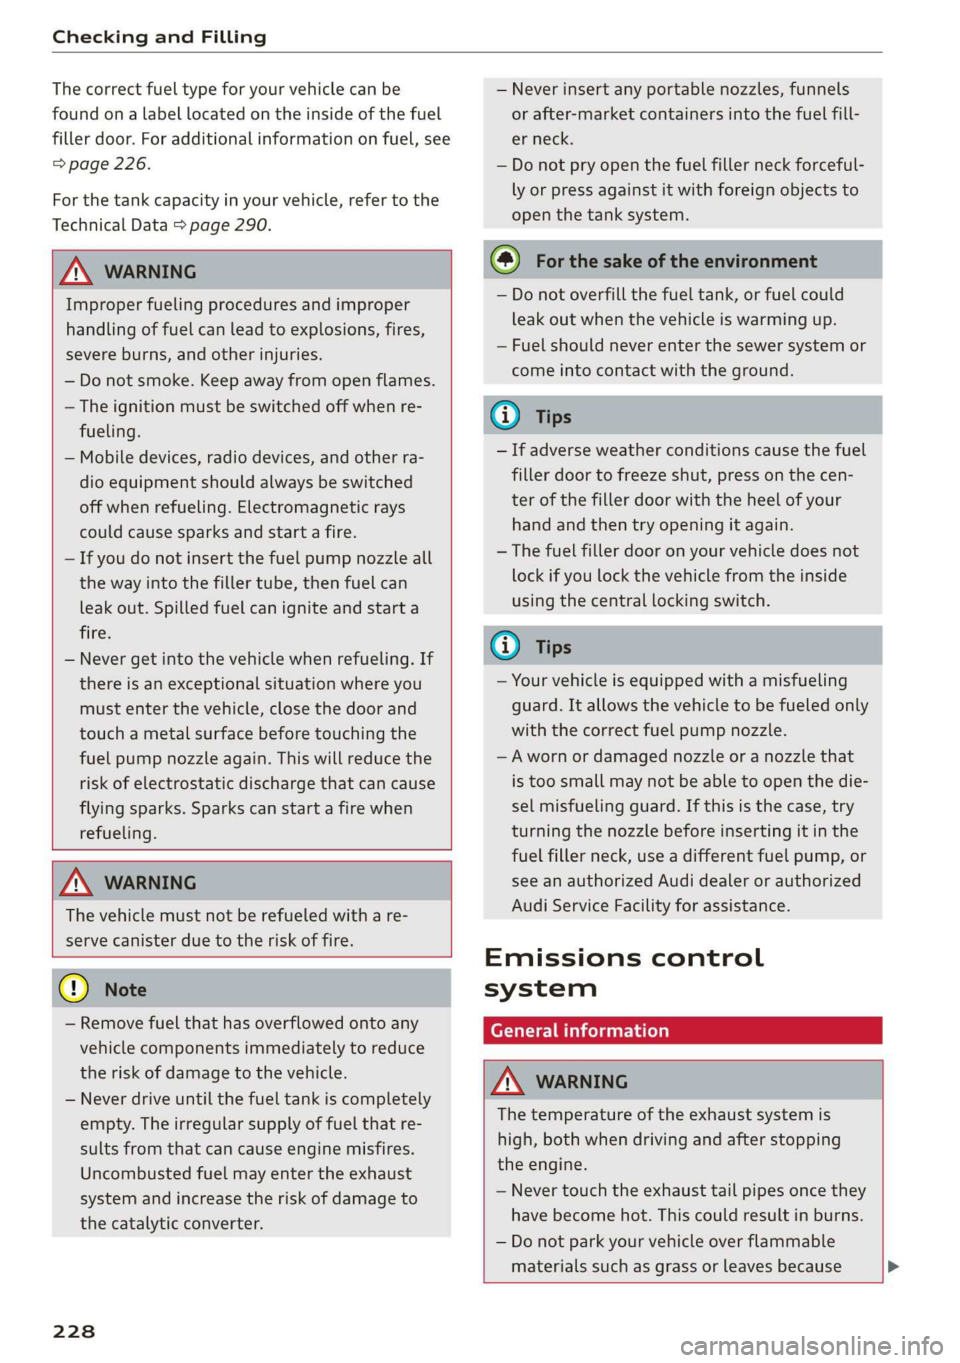 AUDI R8 COUPE 2020  Owners Manual Checking and Filling 
  
The correct fuel type for your vehicle can be 
found ona label located on the inside of the fuel 
filler door. For additional information on fuel, see 
=> page 226. 
For the t